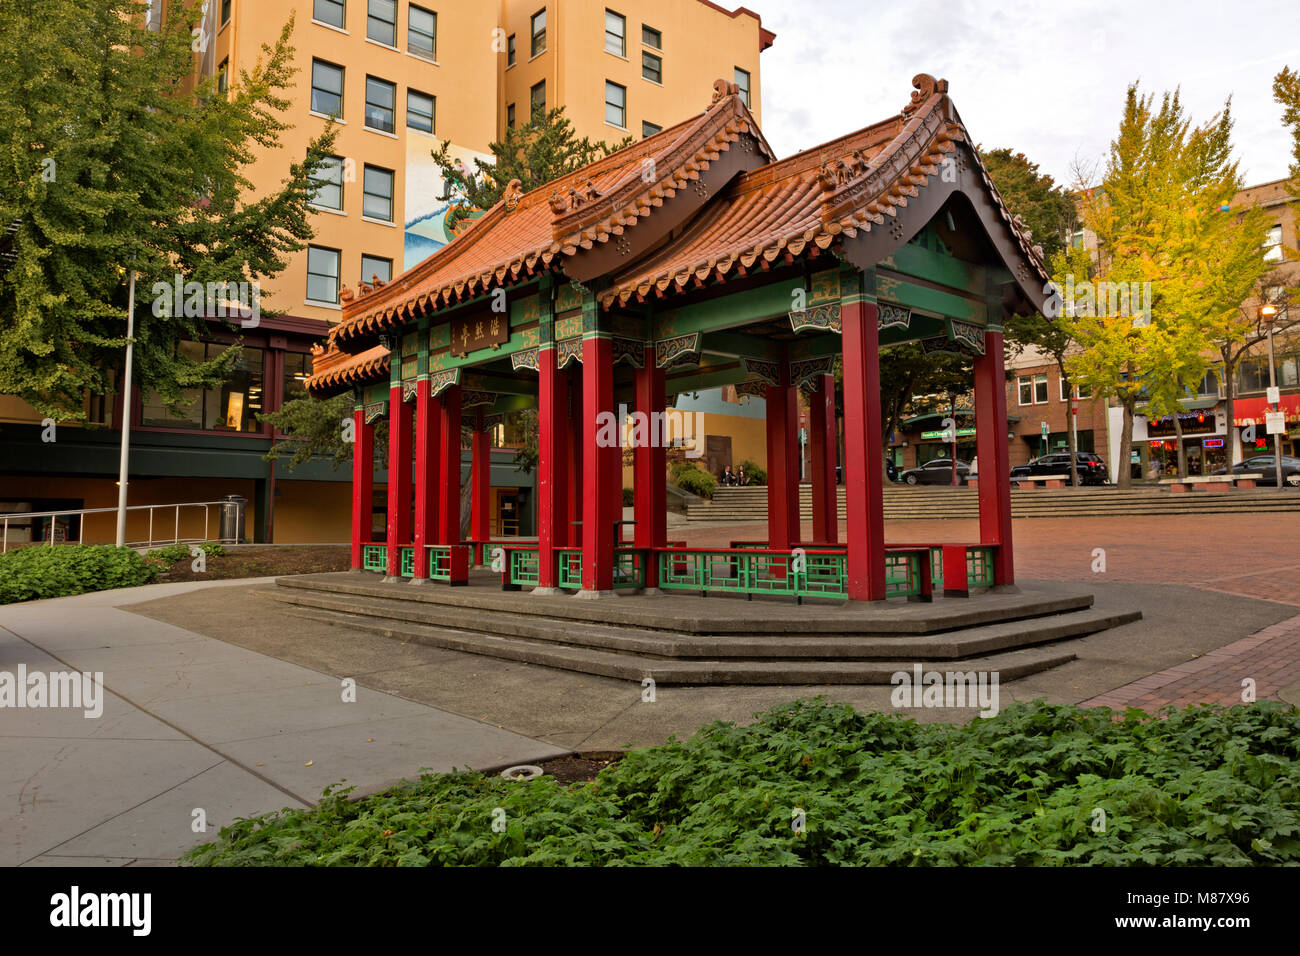 WA13842-00...WASHINGTON - The Grand Pavilion at Hing Hay Park in Seattle's International District. Stock Photo